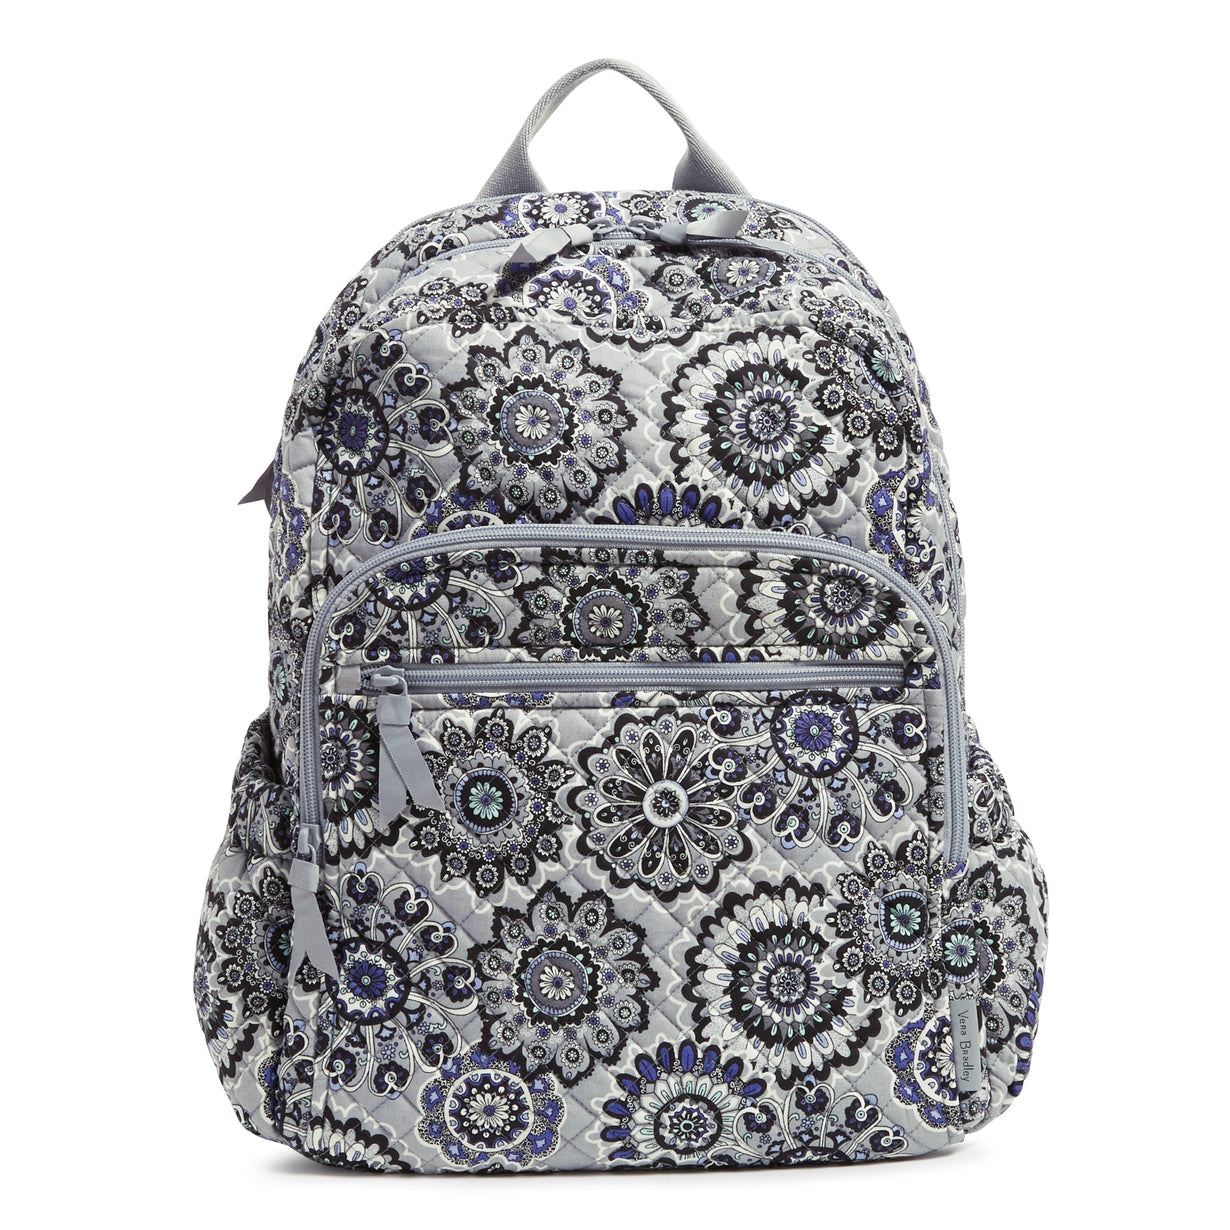 A Vera Bradley Campus Backpack in Tranquil Medallion pattern.